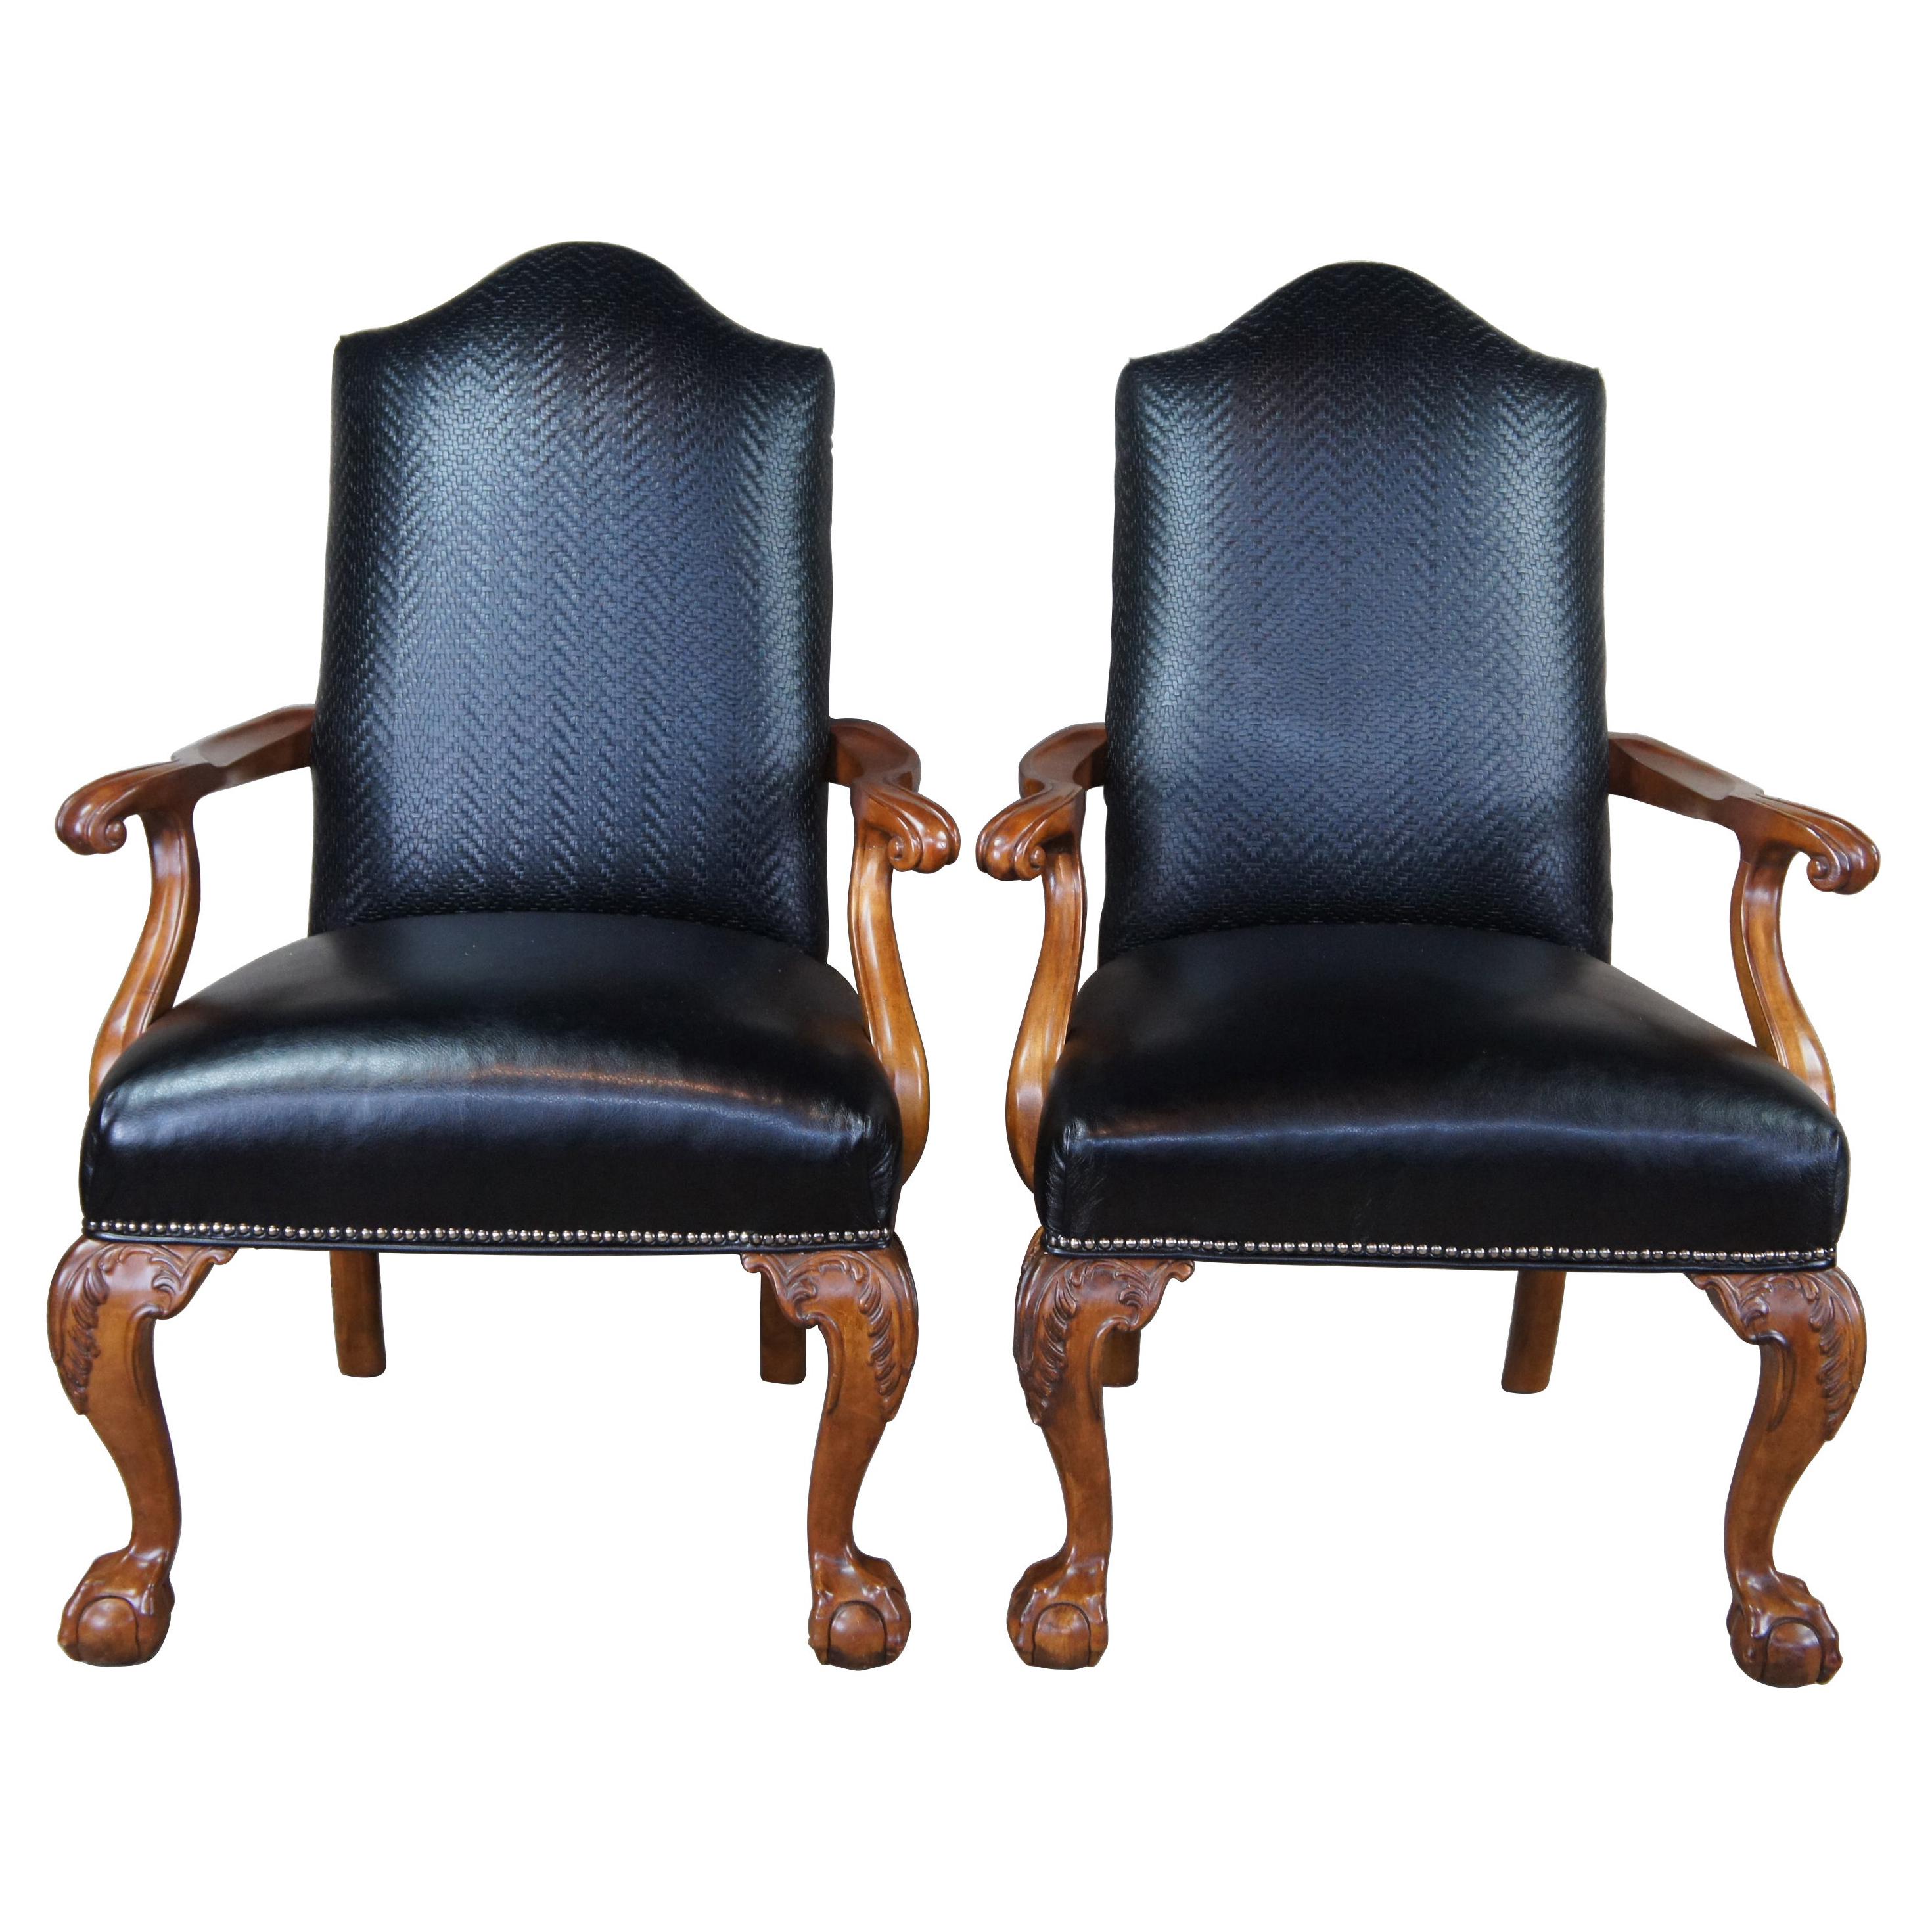 2 Century Chippendale Black Leather Nailhead Library Arm Chairs Ball & Claw